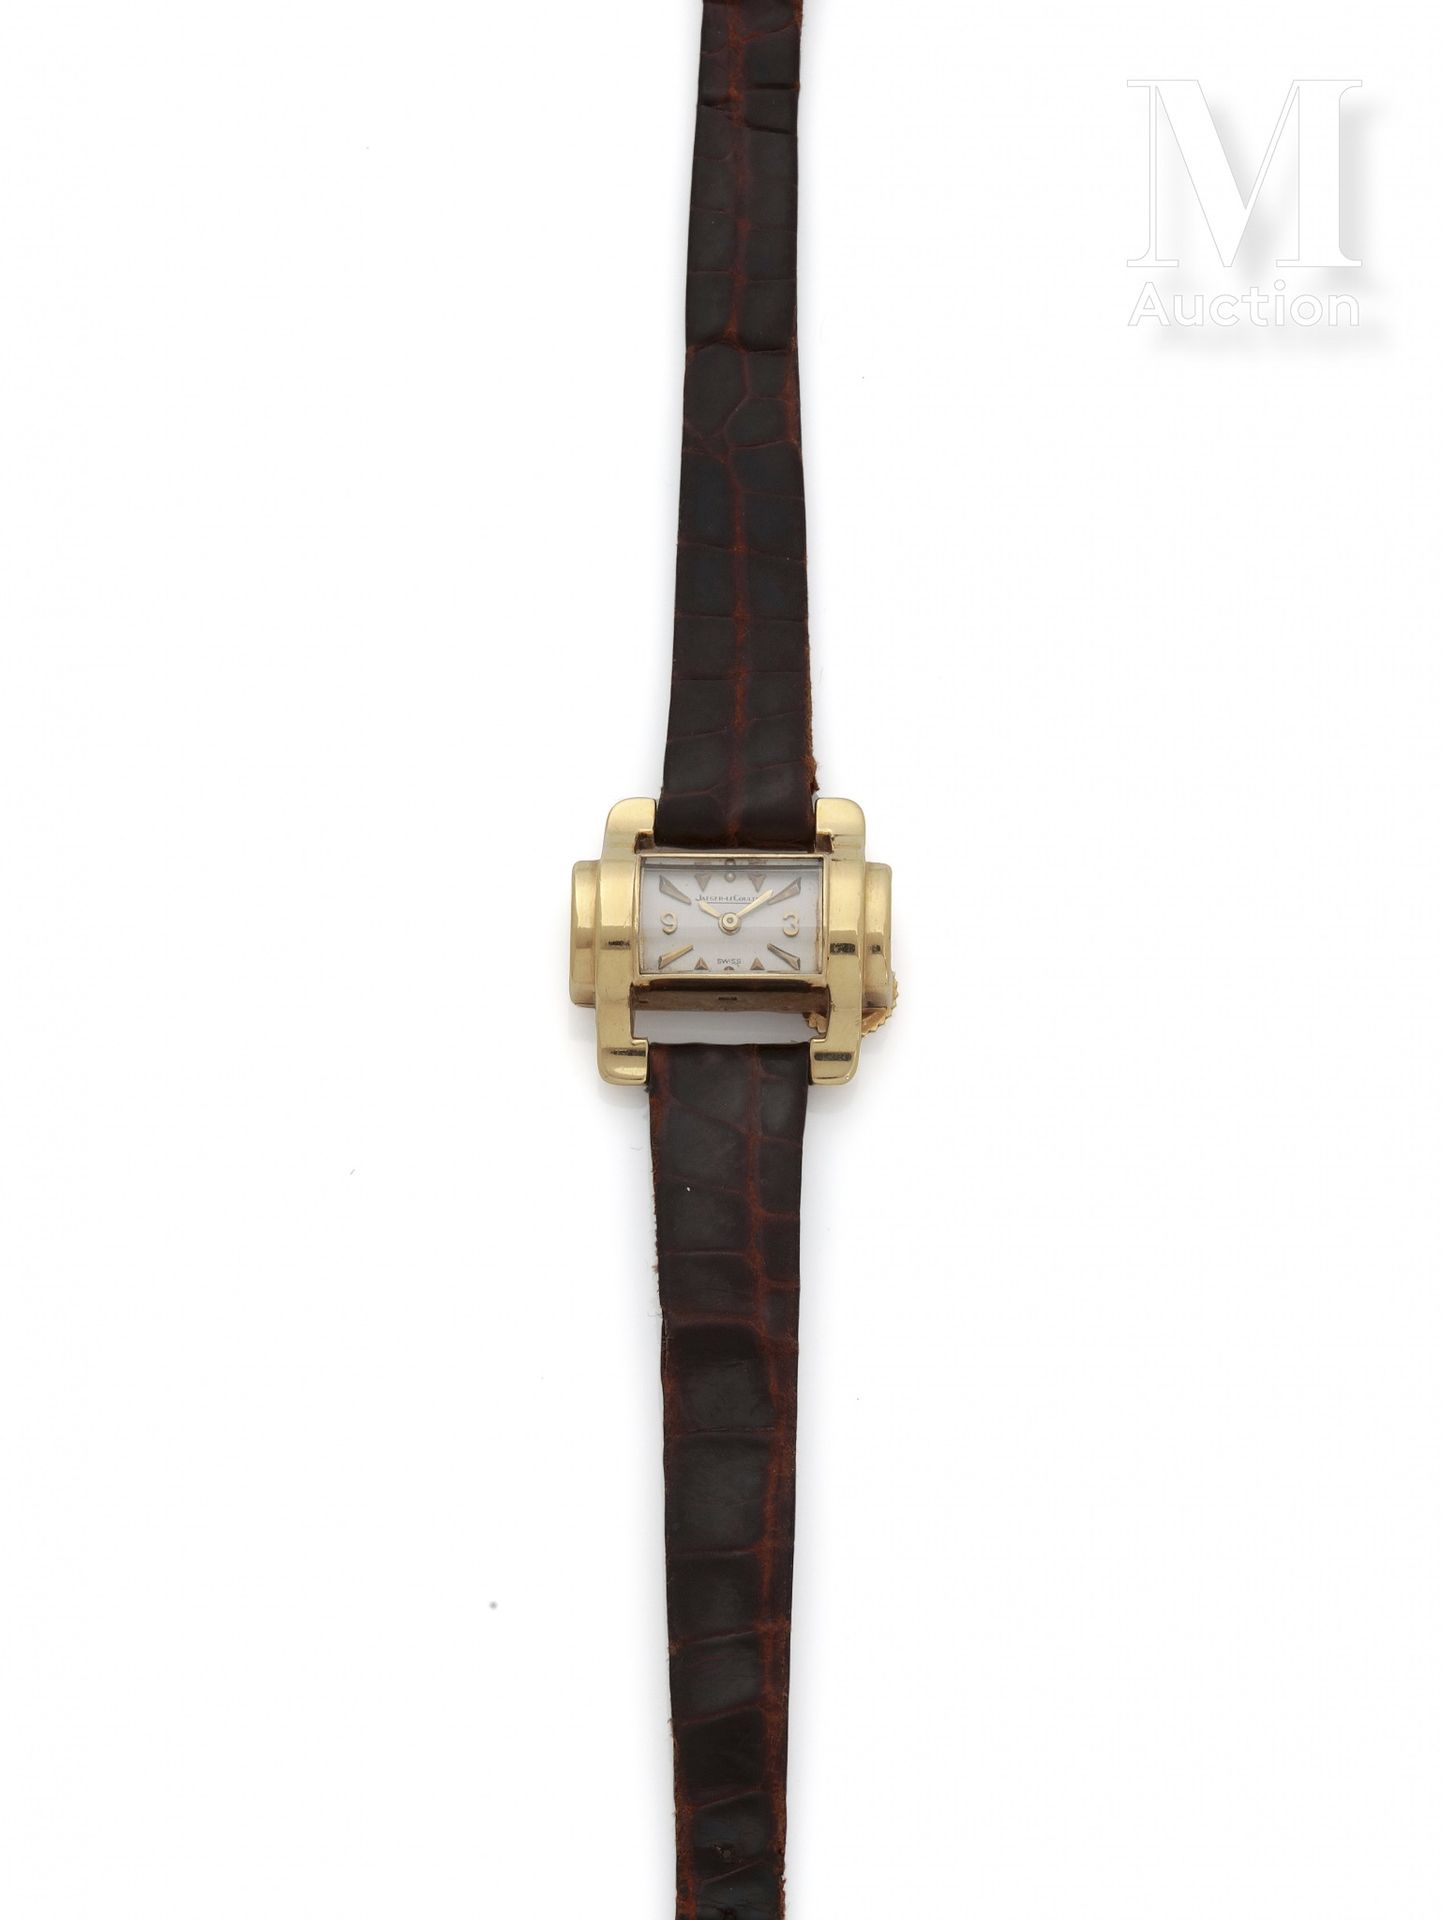 JAEGER-LECOULTRE Very rare woman's watch

Model called "tuile" duoplan

Circa 19&hellip;